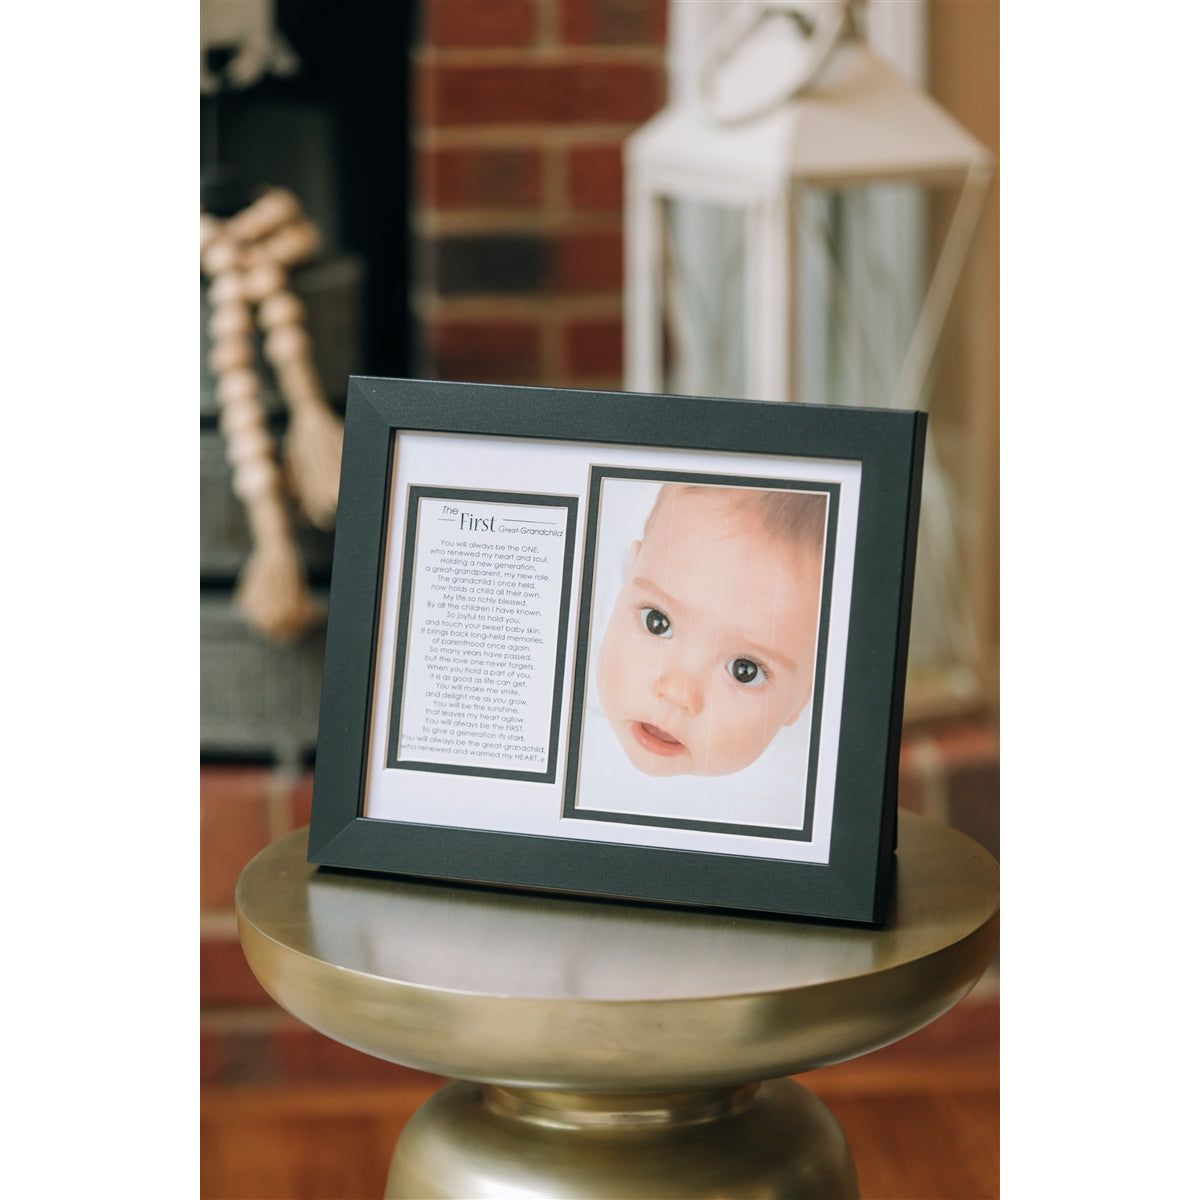 First Great-Grandchild frame sitting on an end table.